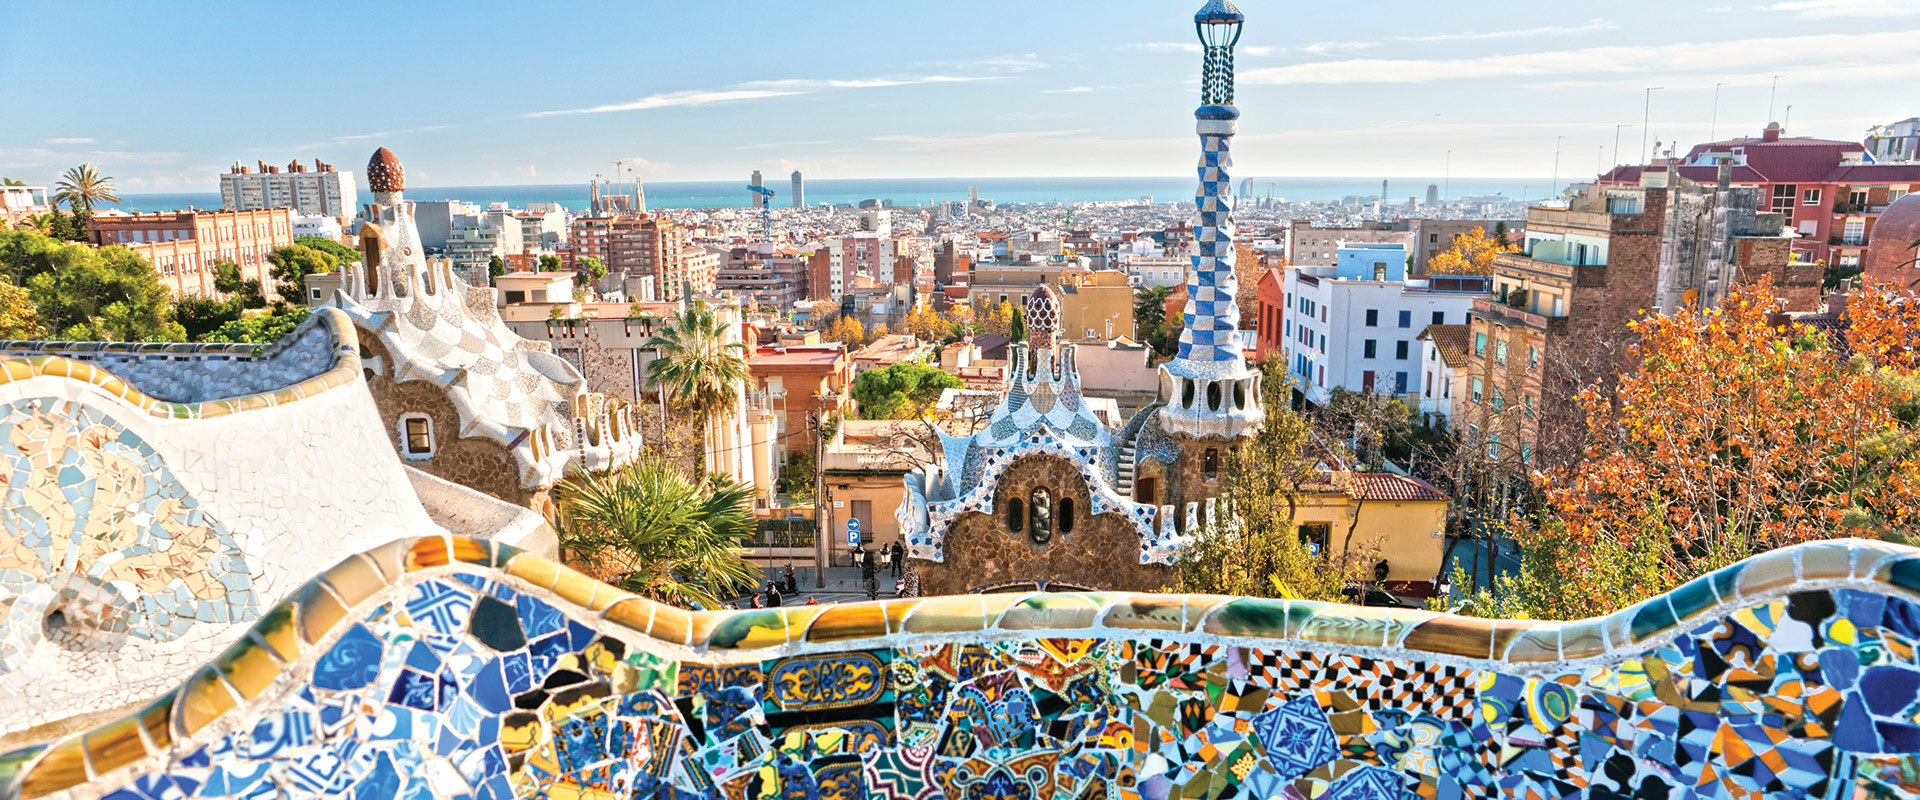 View of colourful tiled wall and vibrant buildings in Park Guell, Barcelona